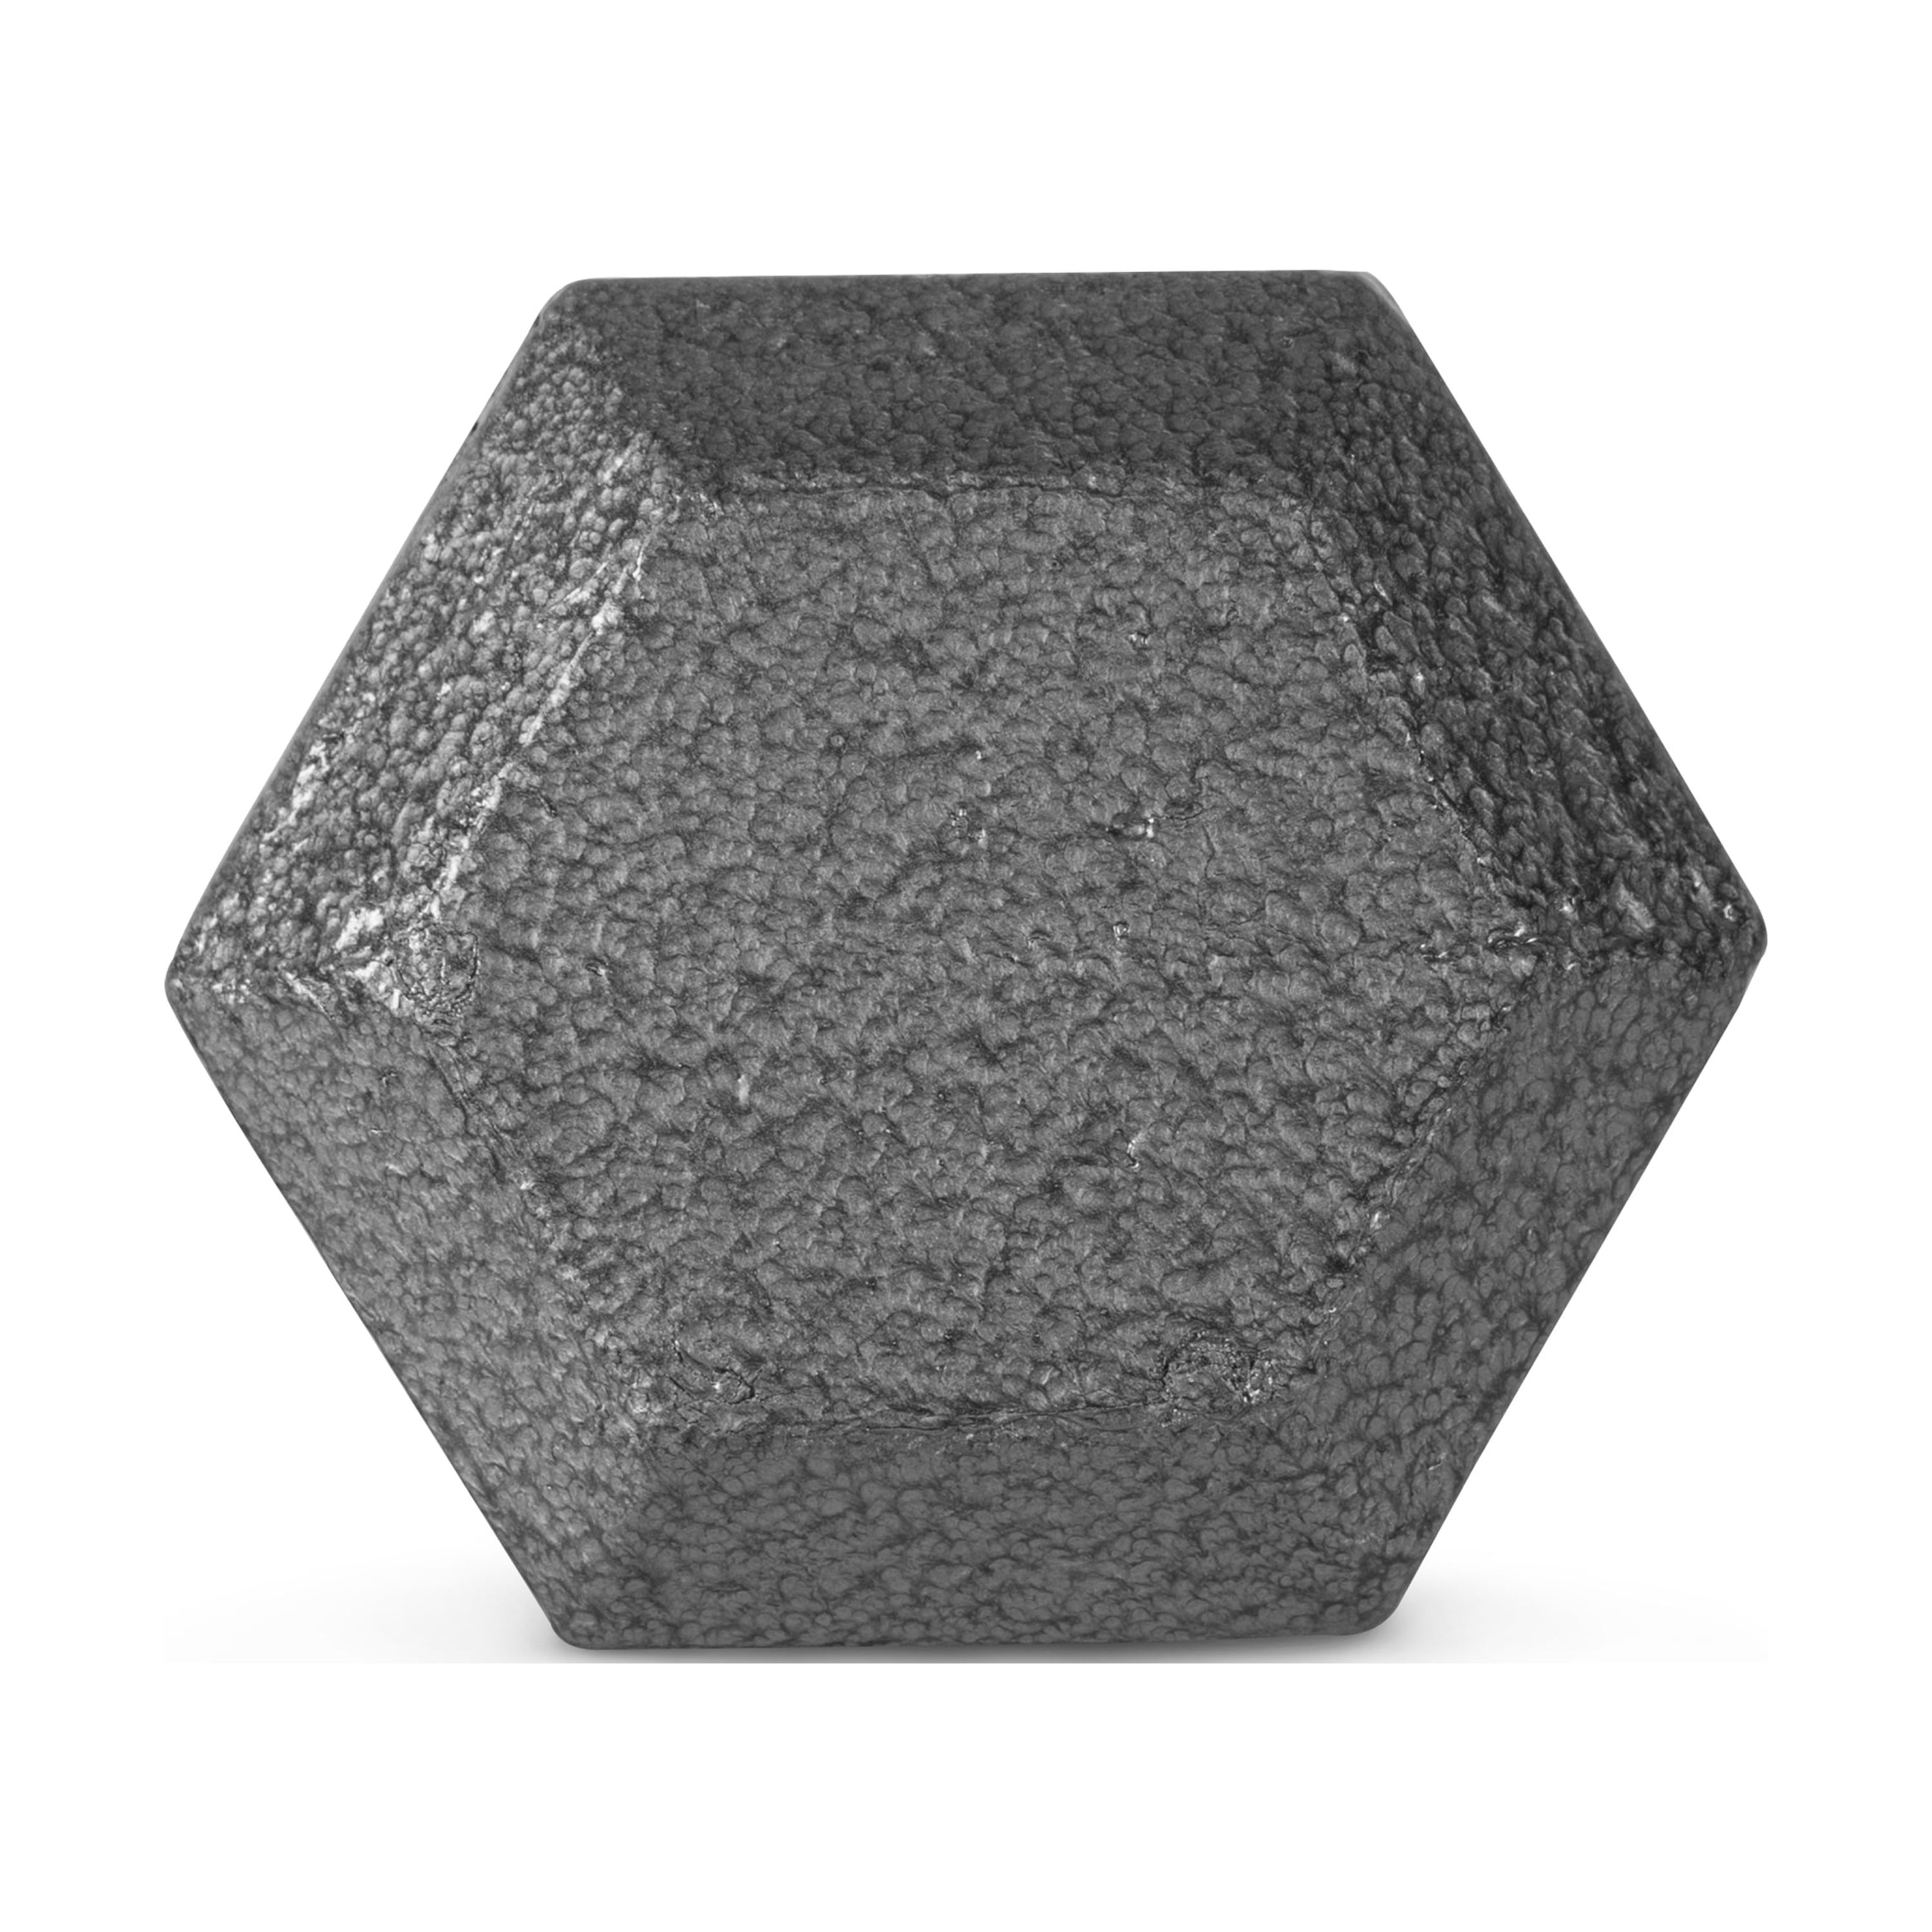 CAP Barbell 8lb Cast Iron Hex Dumbbell, Single - image 3 of 6